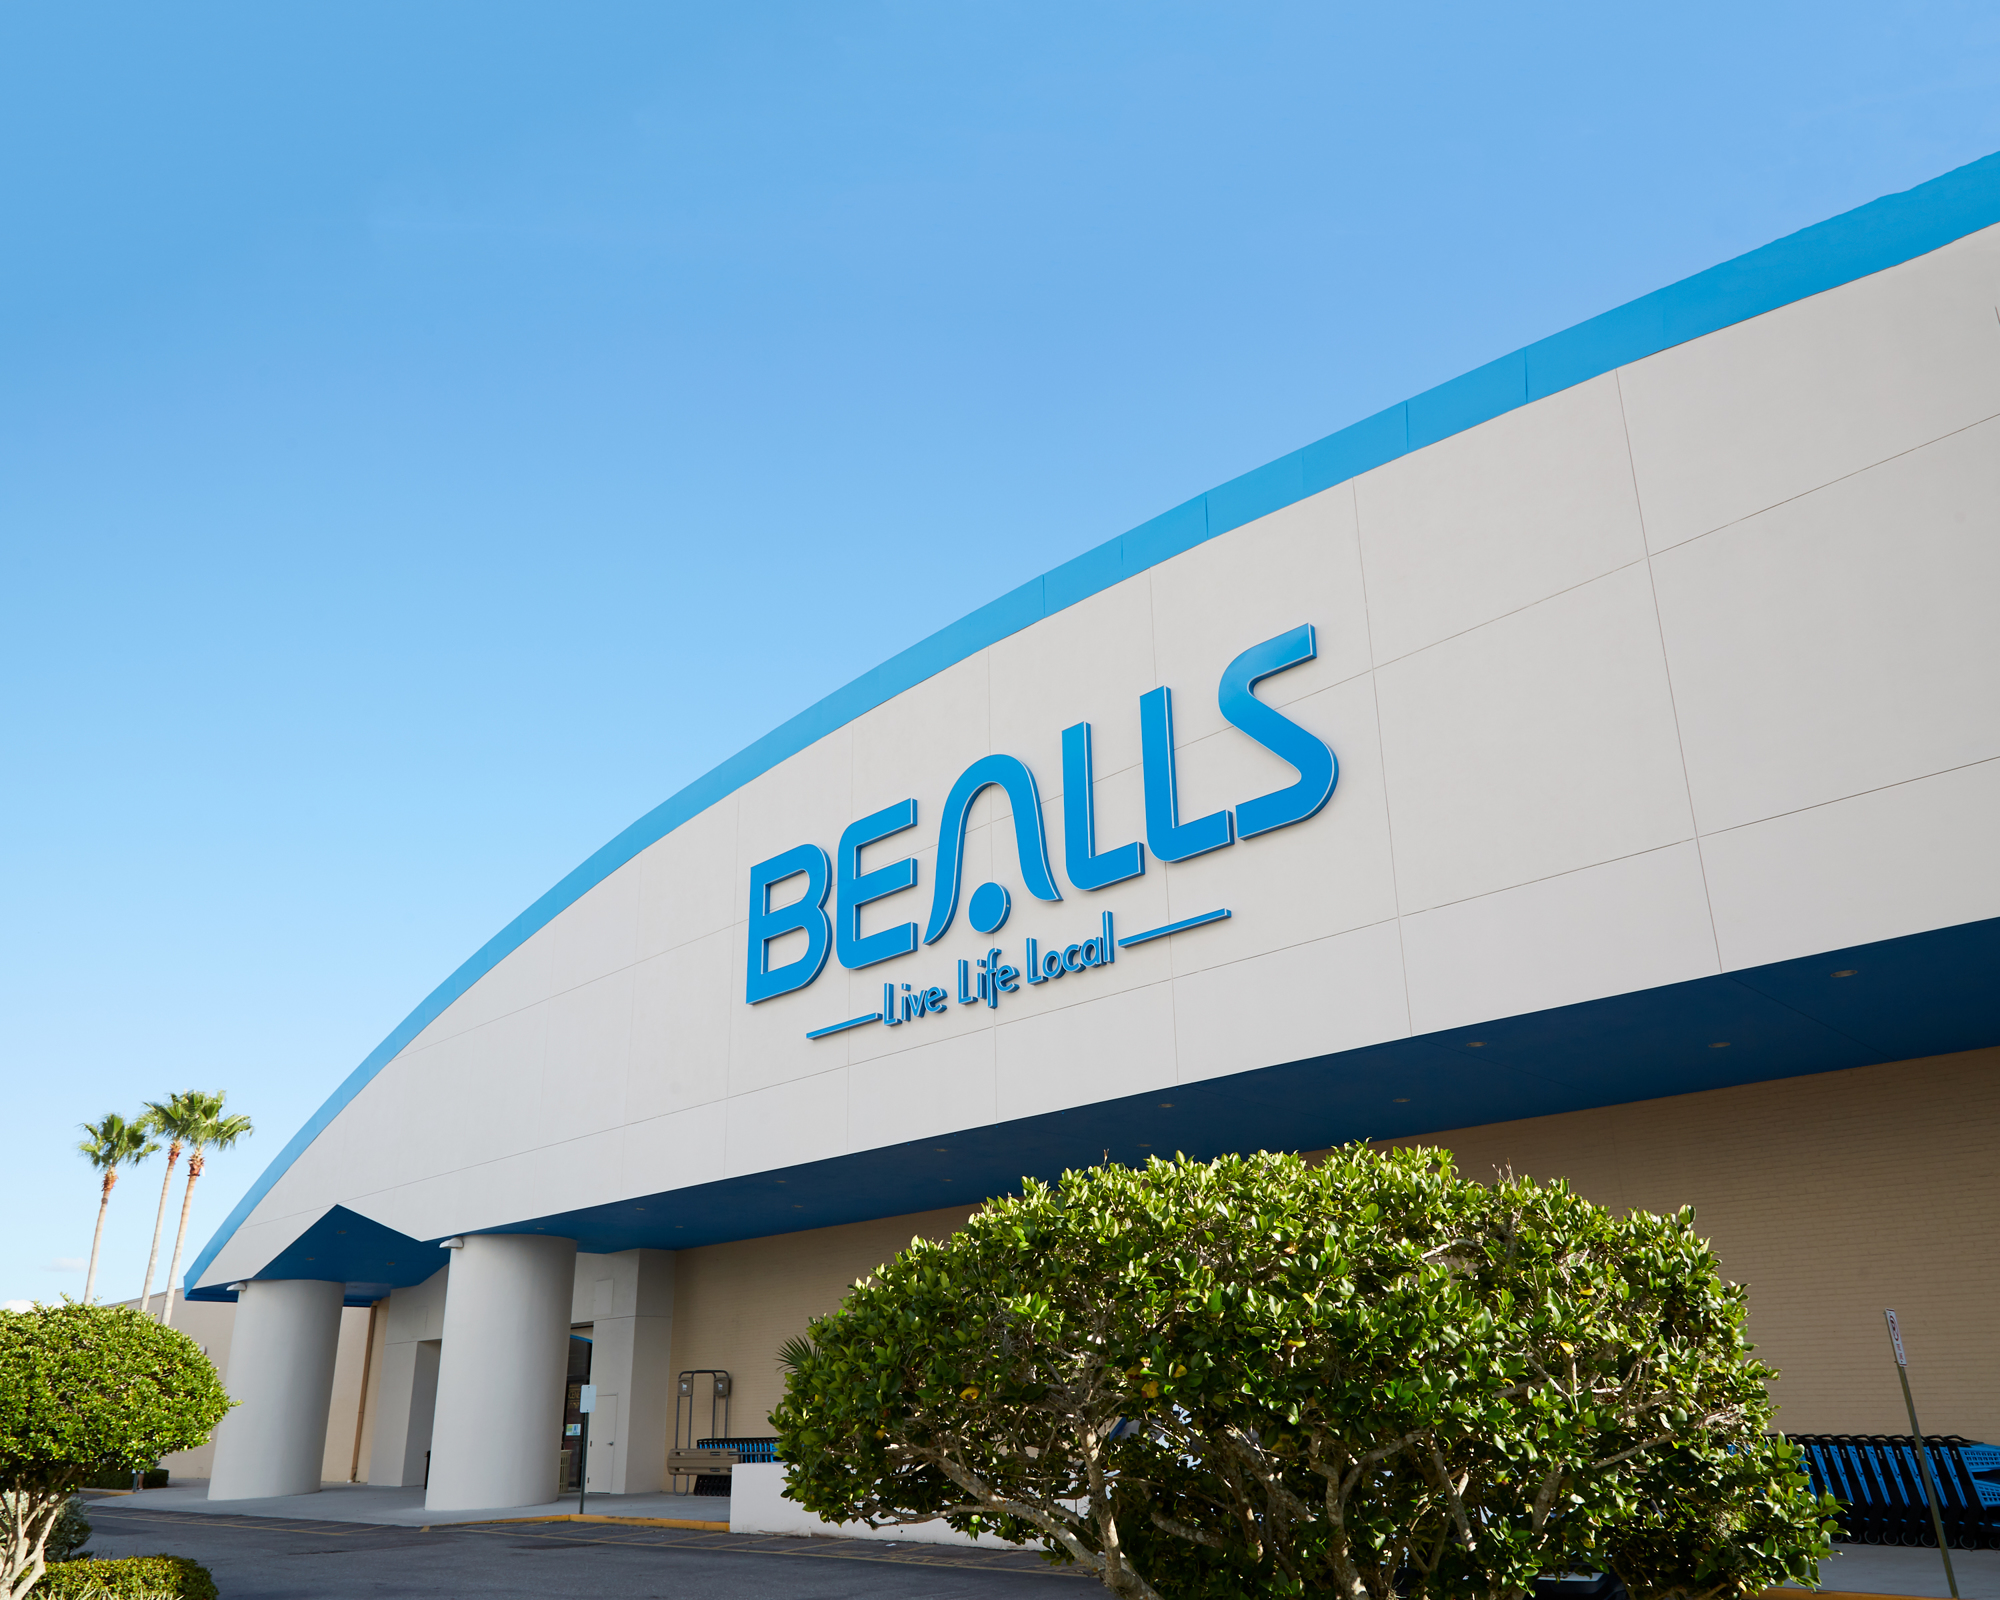 COURTESY PHOTO -- Bealls Inc. took steps to make its more than 500 stores cleaner and safer before re-opening them beginning in April.